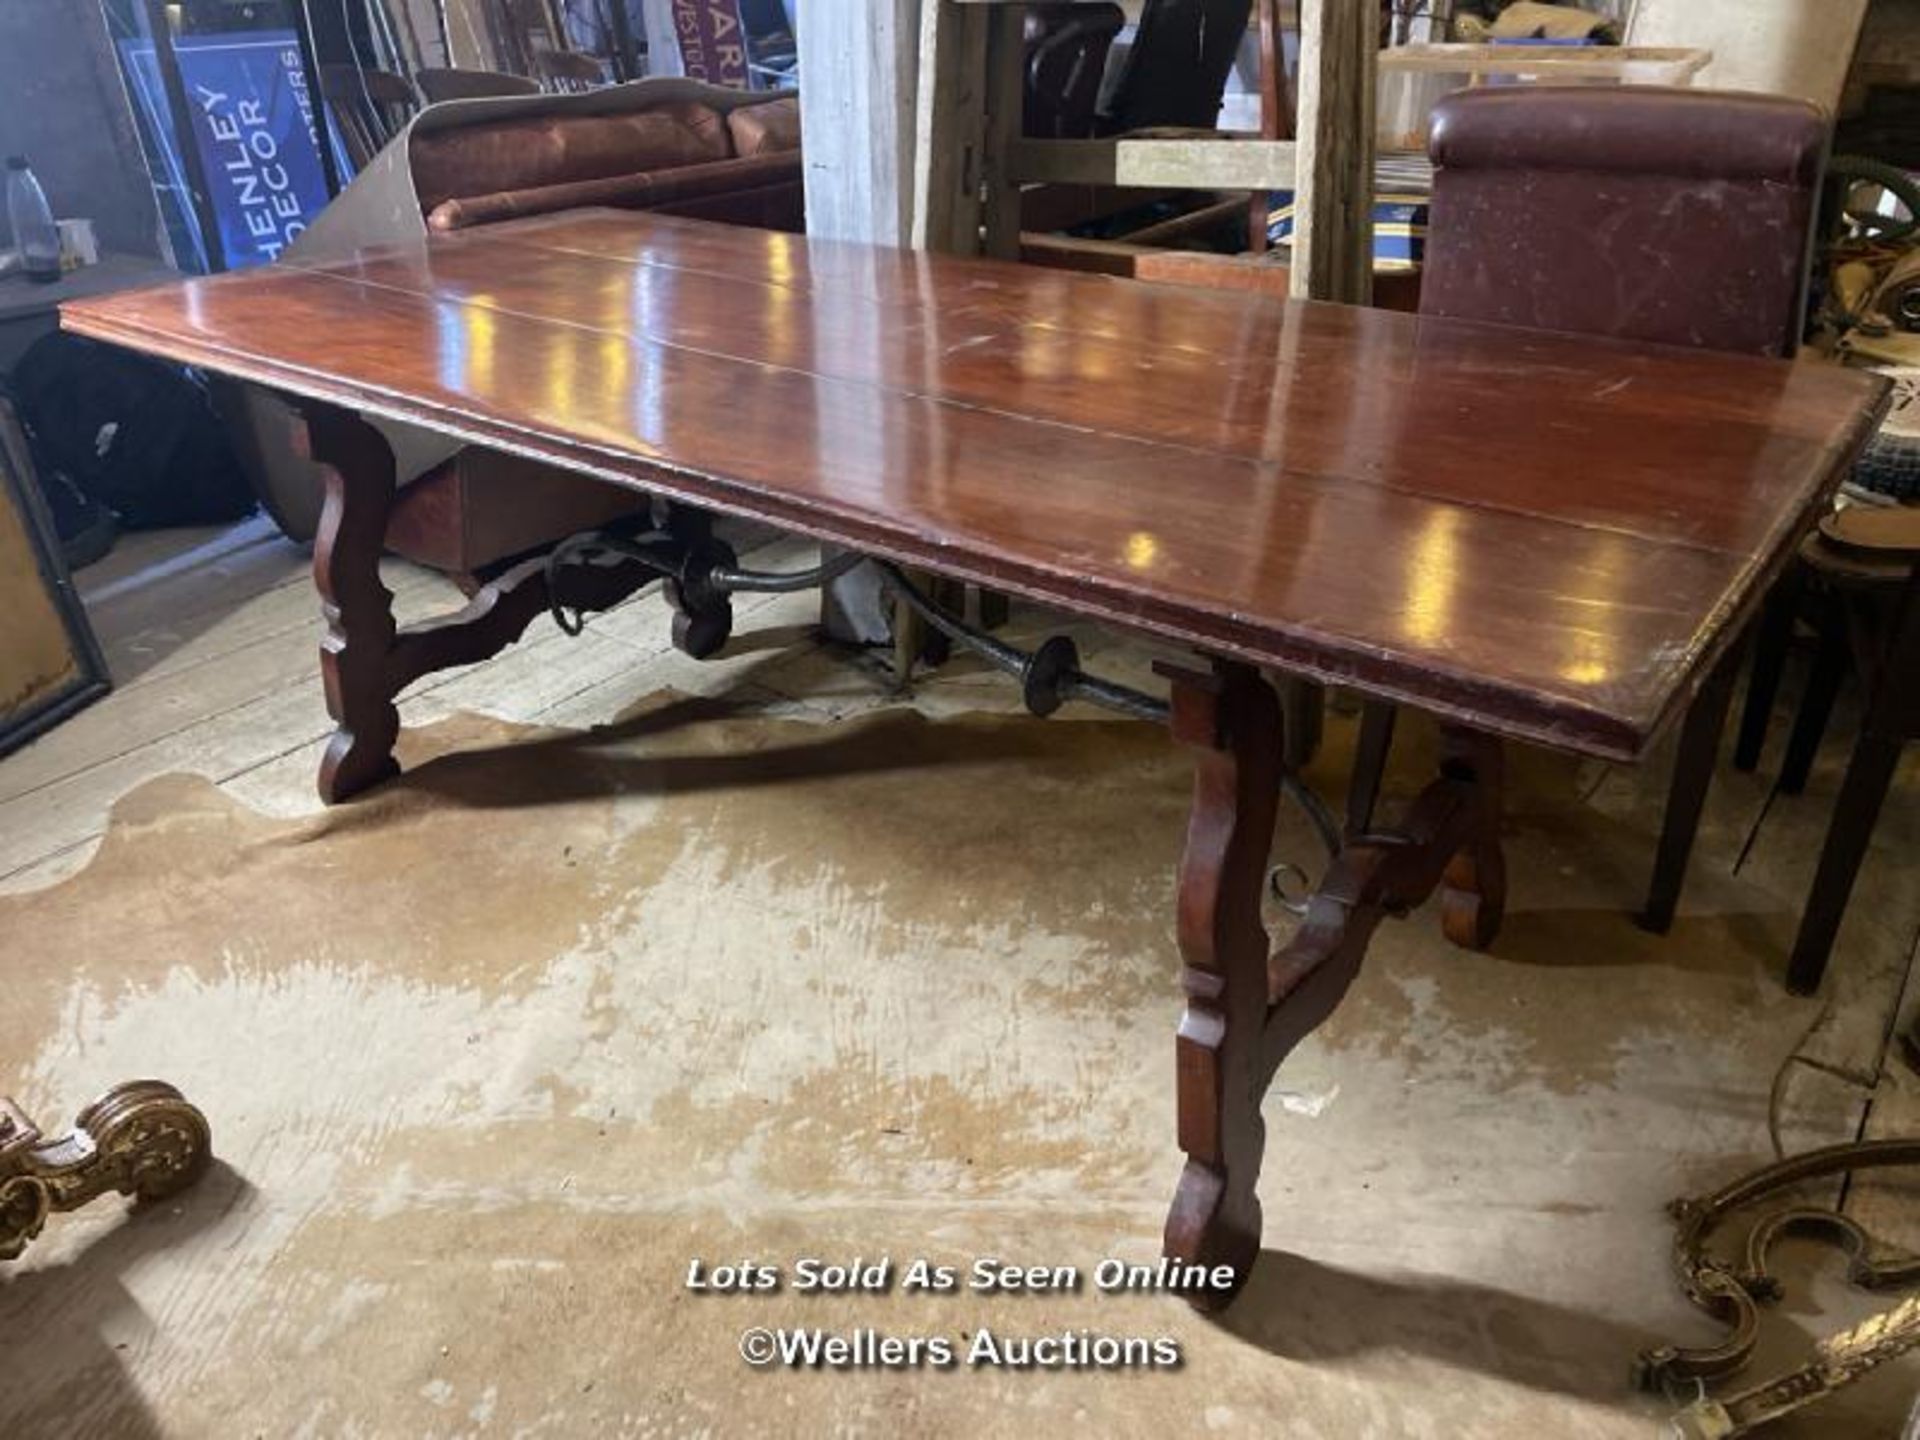 AN 18TH CENTURY STYLE SPANISH REFECTORY TABLE IN FRUITWOOD, 204 X 83 X 77CM